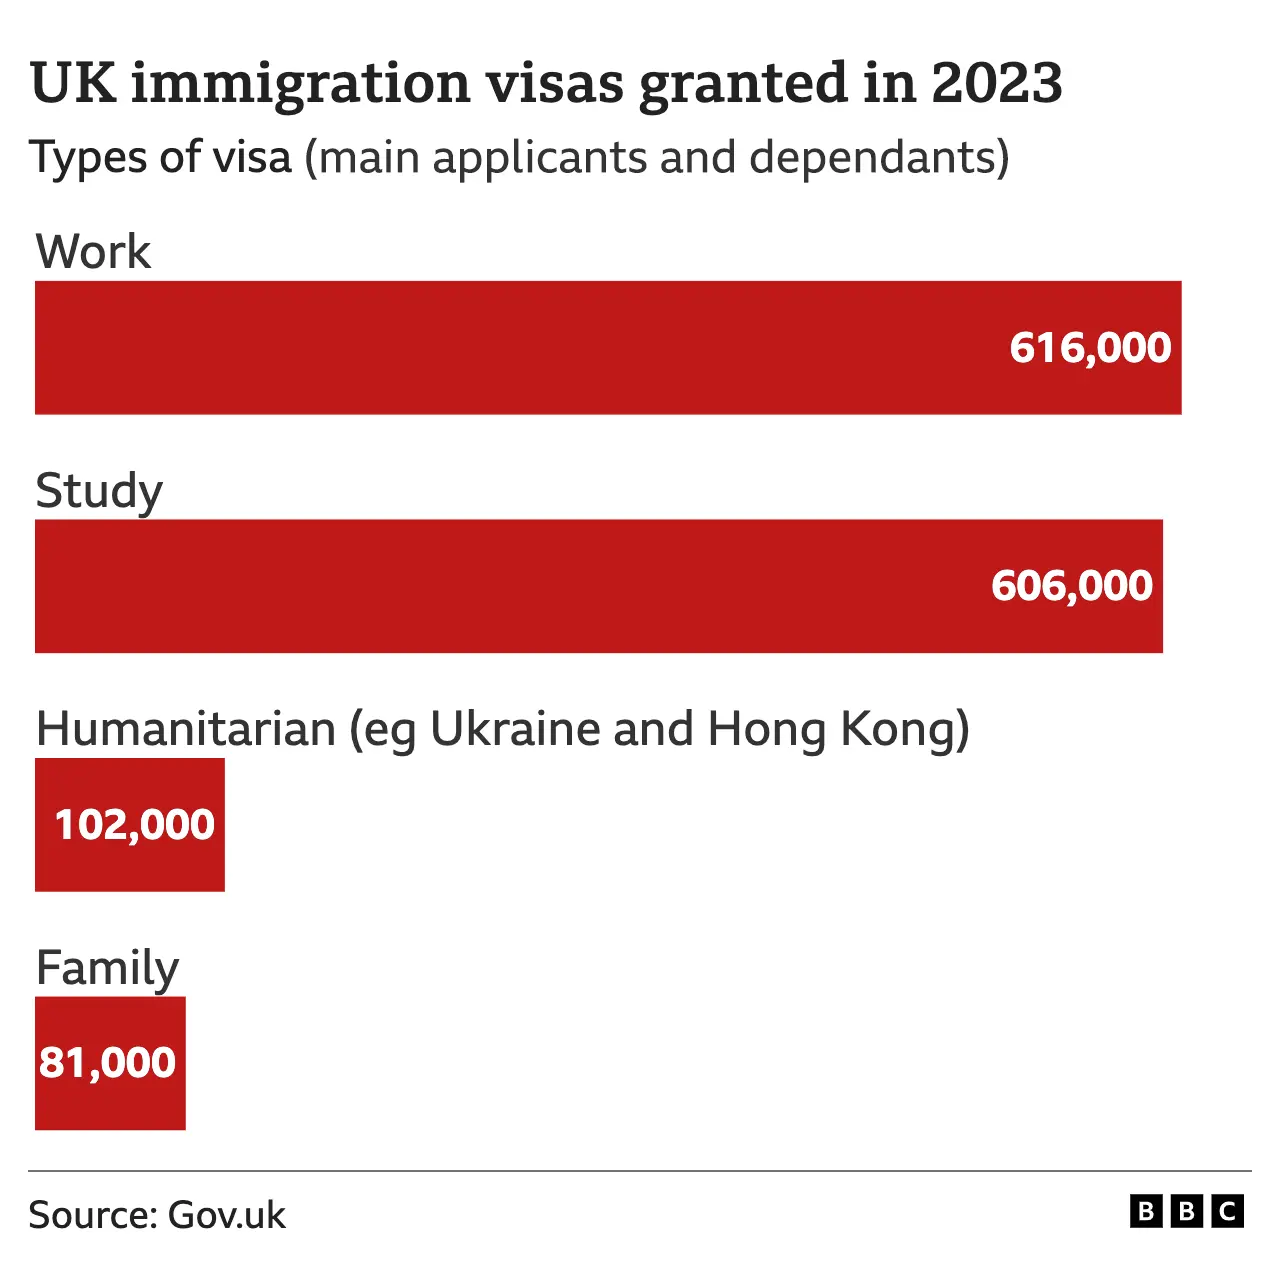 UK immigration visas granted in 2023